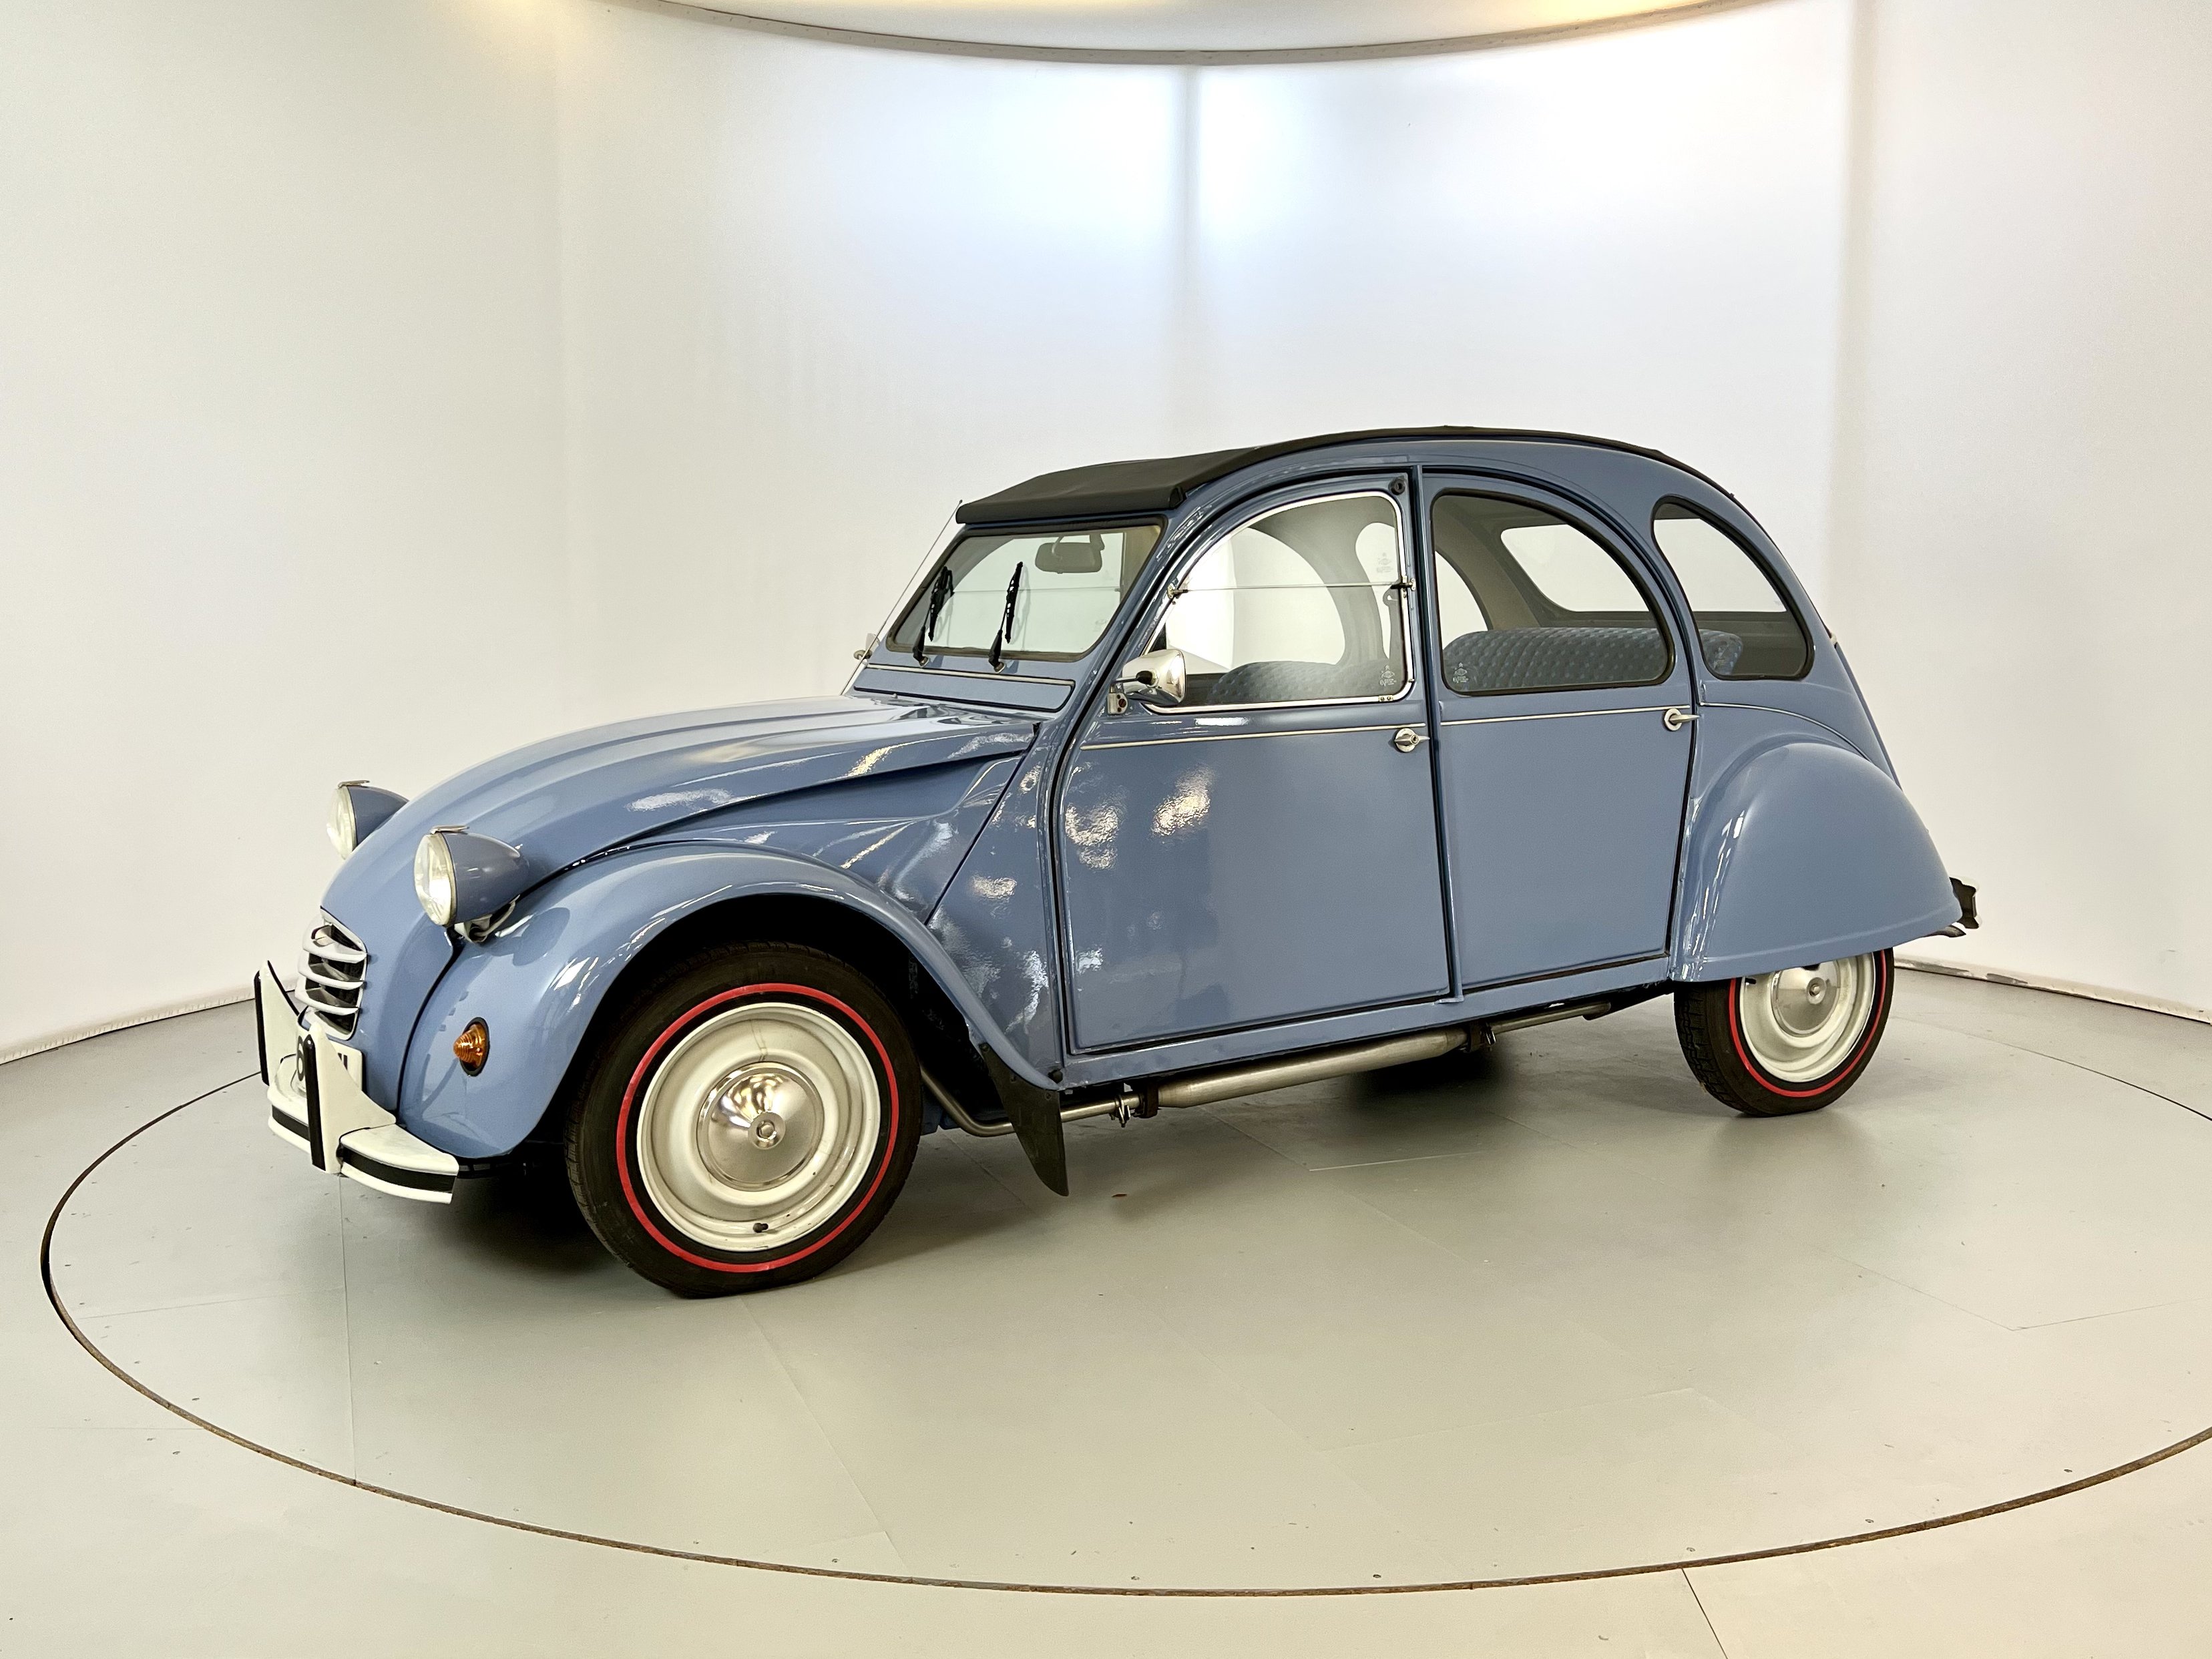 Relive A Simpler Time With This Restored 1987 Citroen 2CV